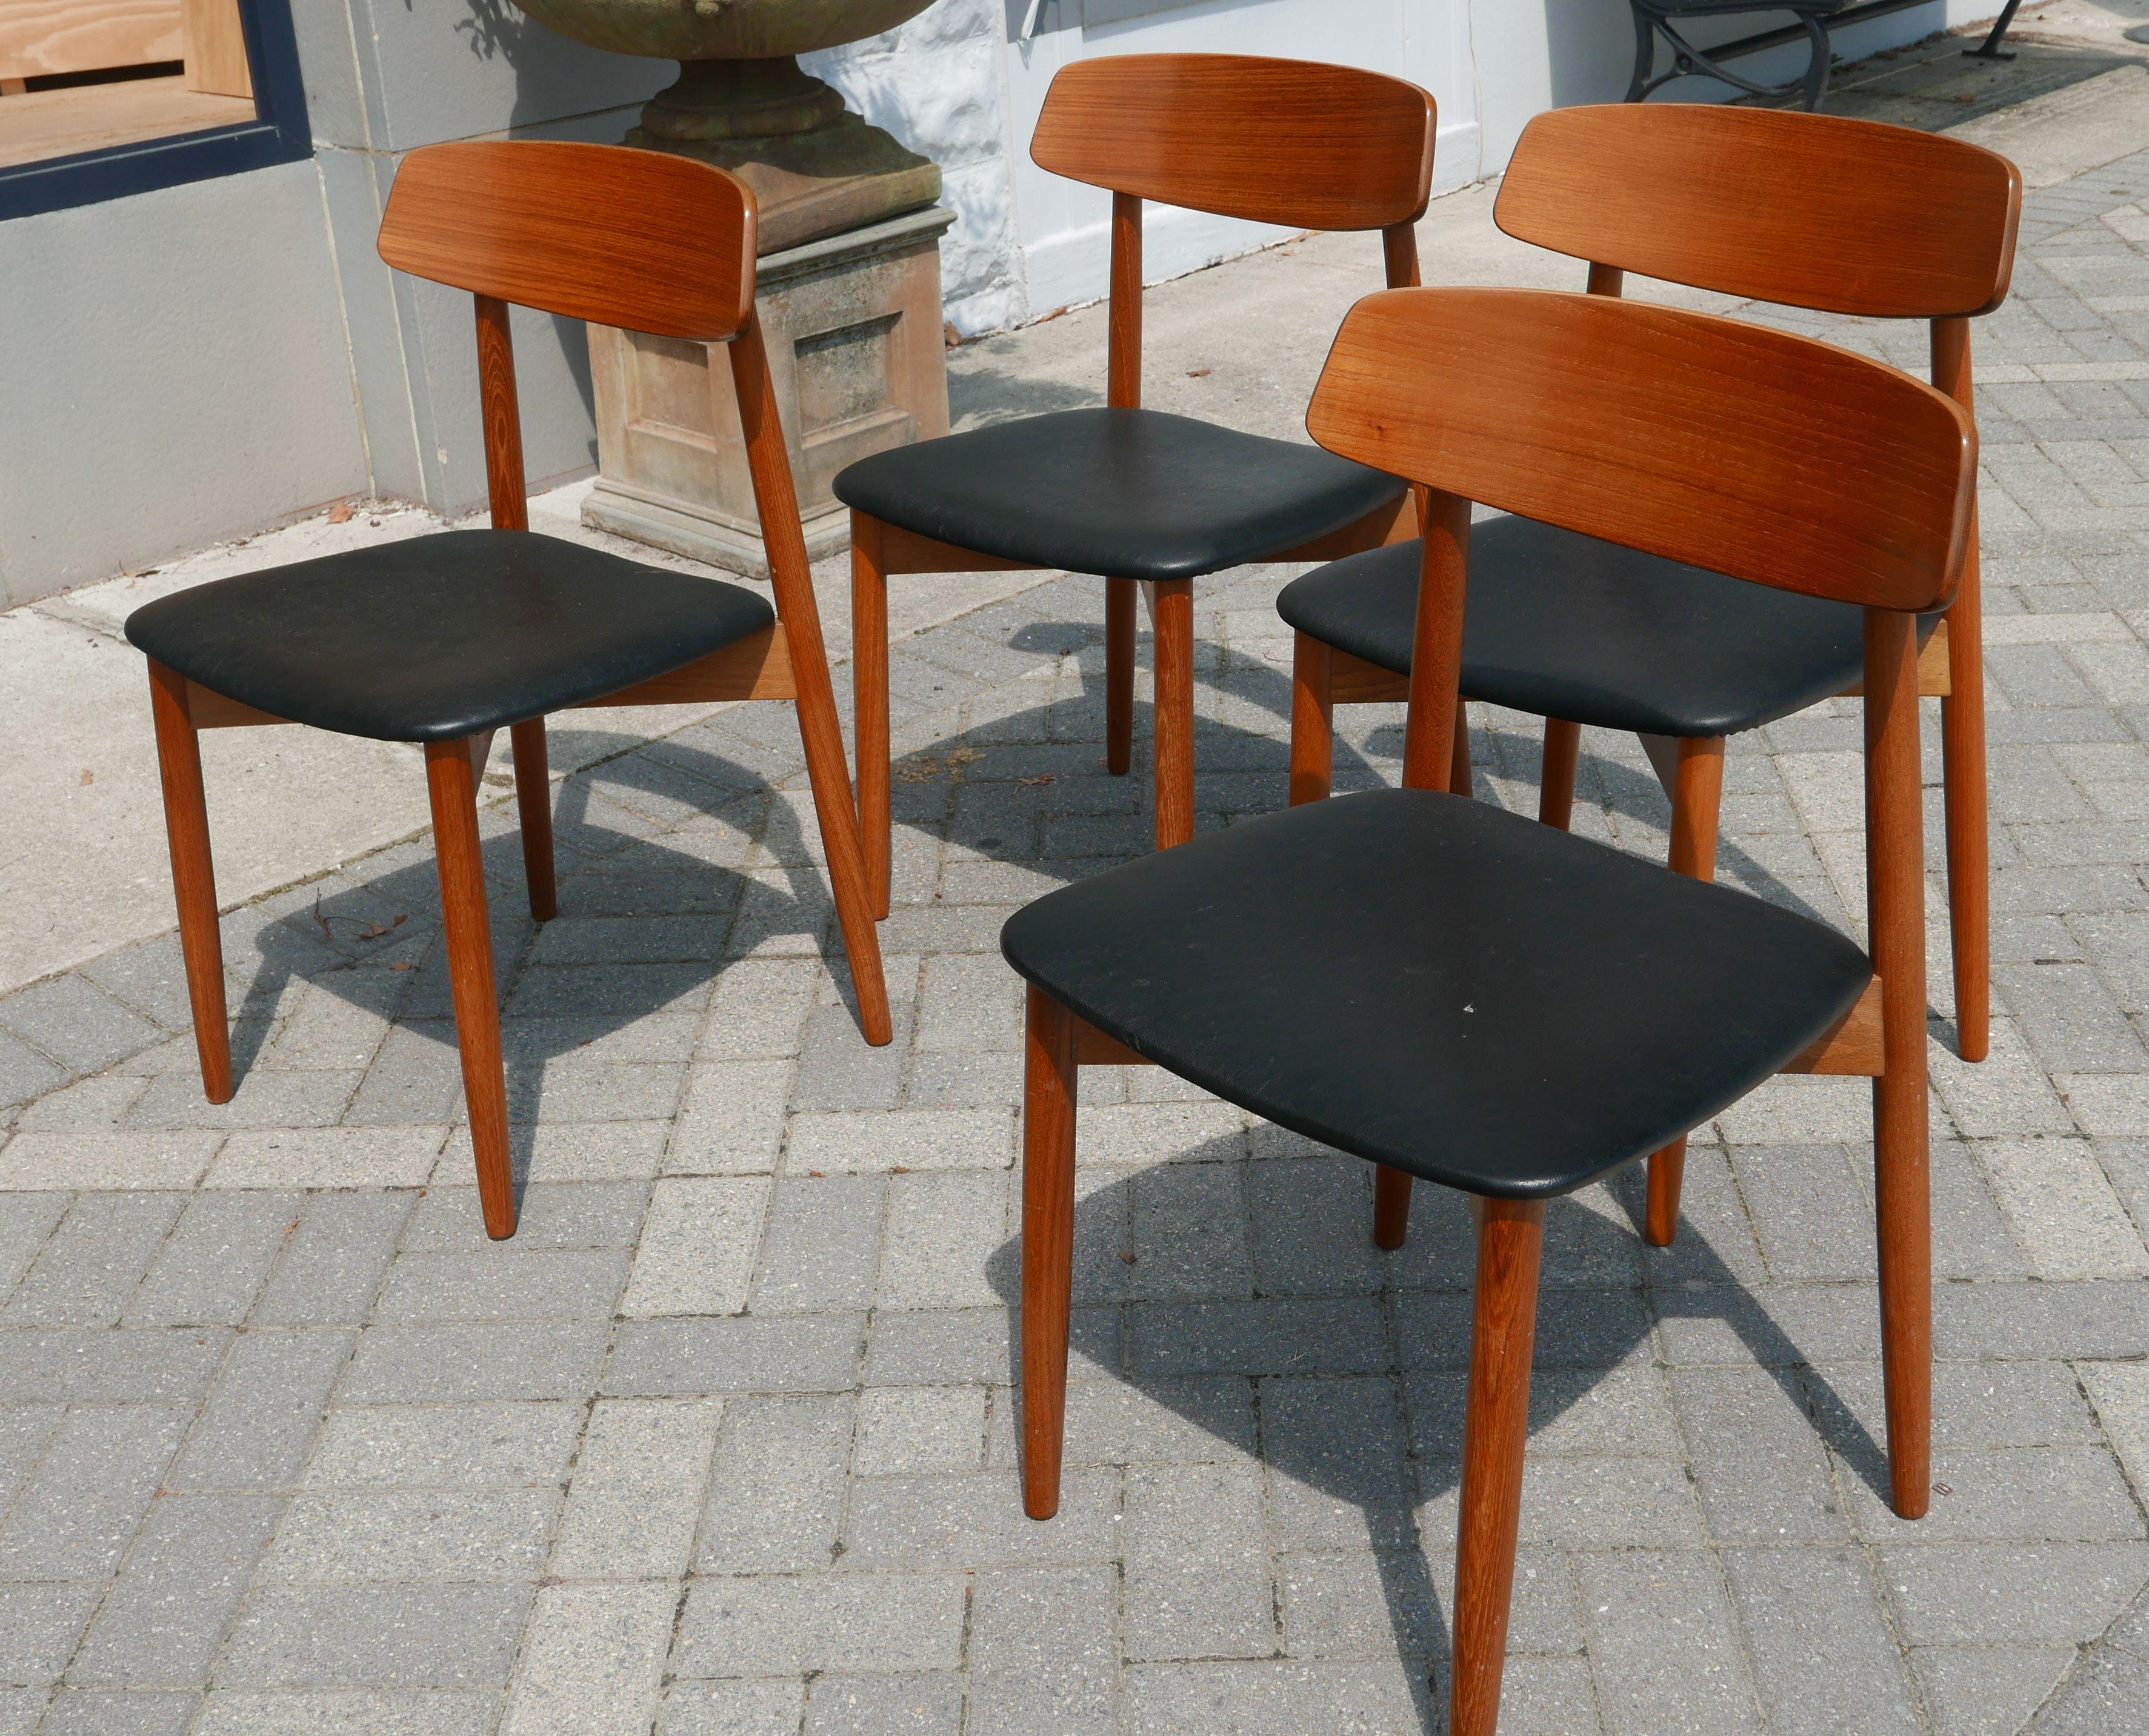 An almost new looking set of Danish modern teak chairs by Harry Østergaard for Randers. Spectacular construction and a wonderful simplicity to the design. Original upholstery in excellent condition.